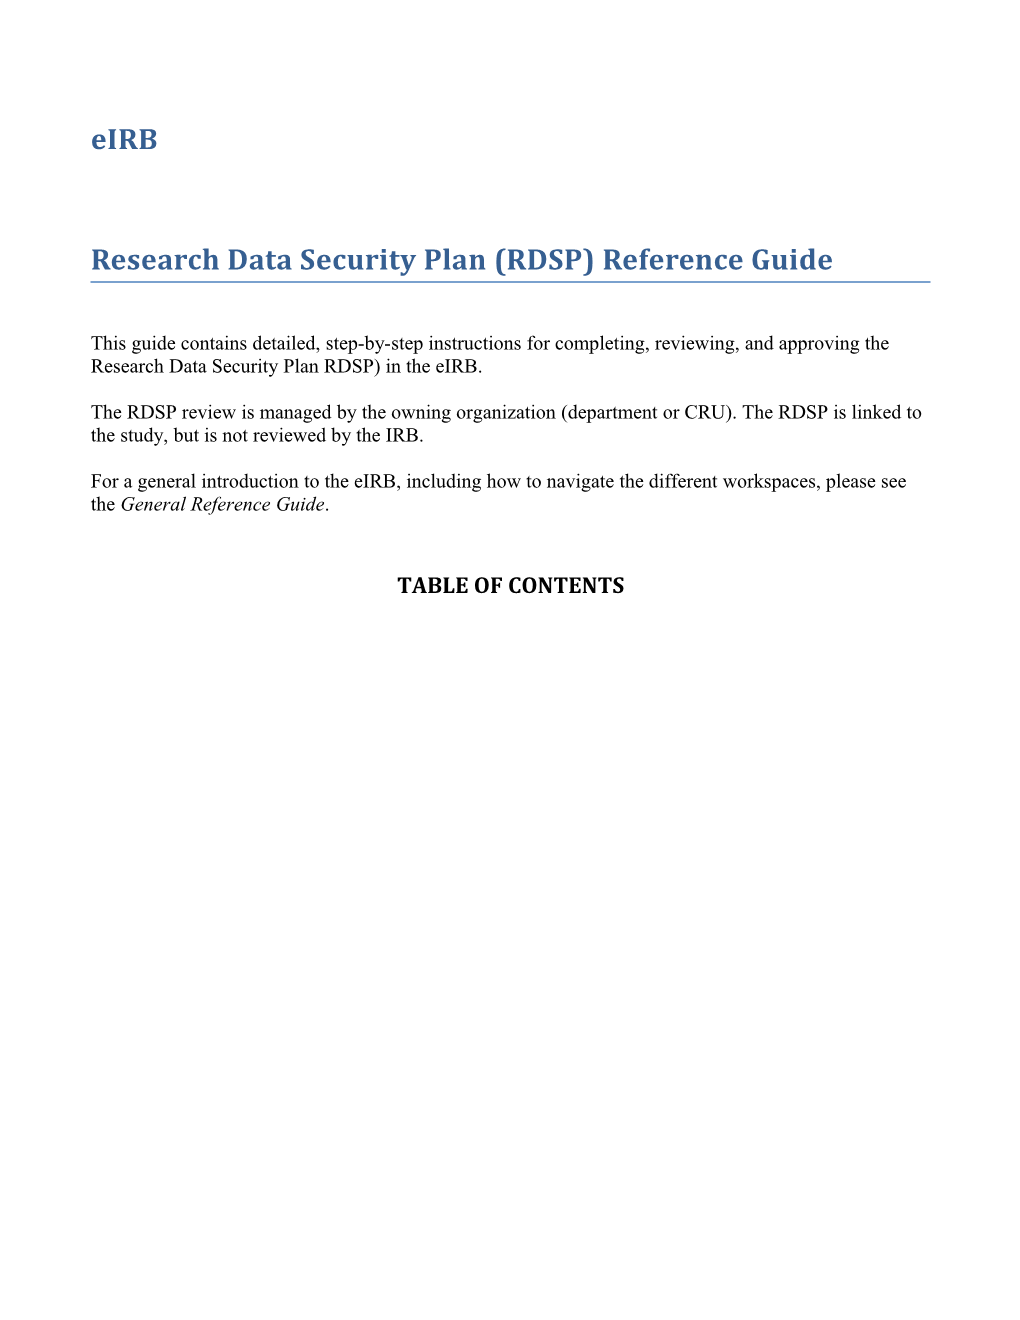 Research Data Security Plan (RDSP) Reference Guide